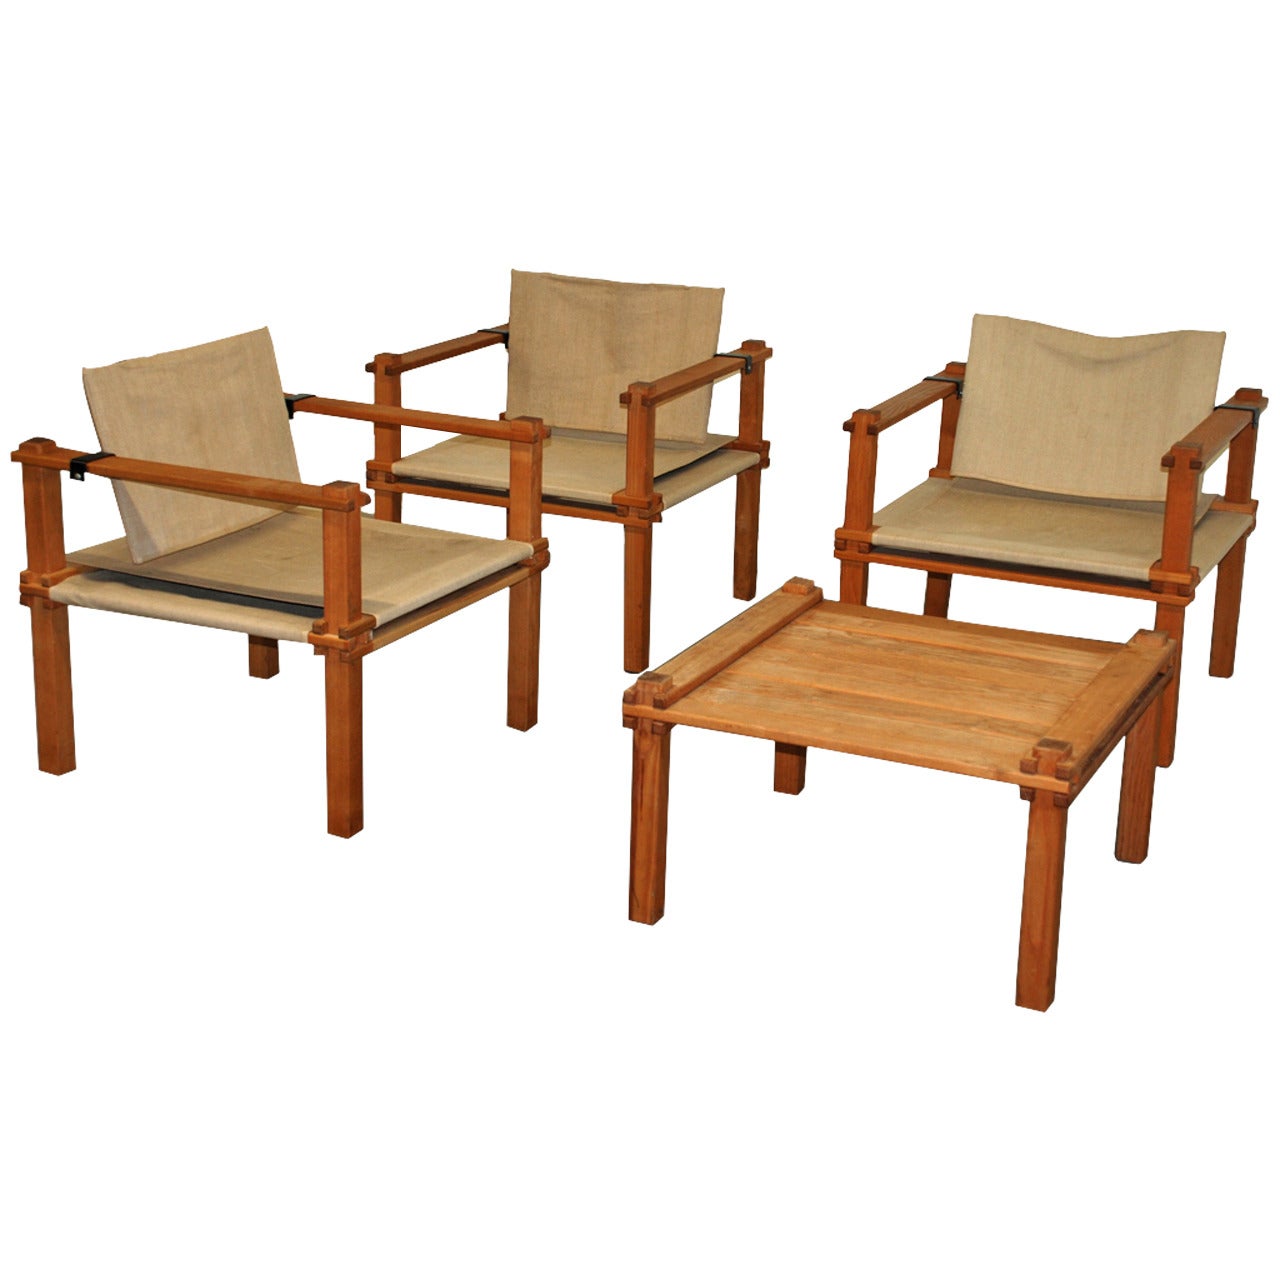 Set of Gerd Lange 'Farmer' Chairs and Table, Bofinger, 1967 For Sale